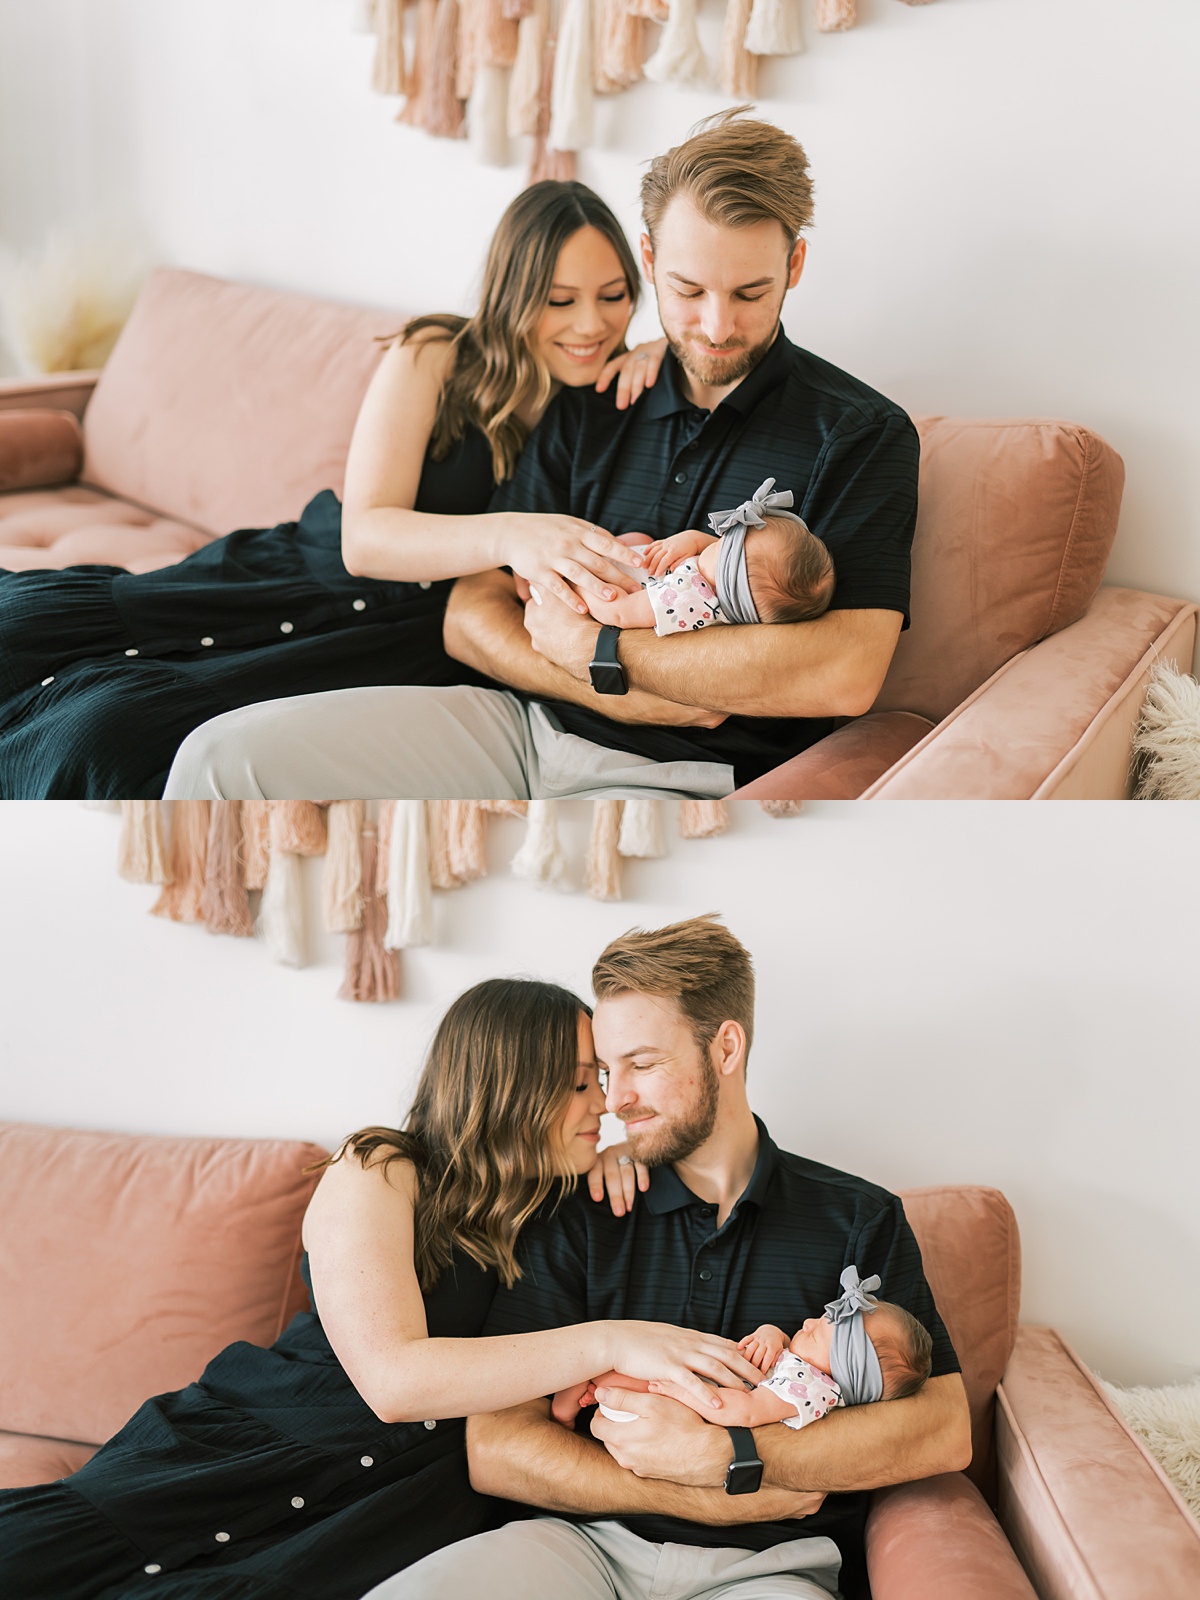 couple holding baby together on couch